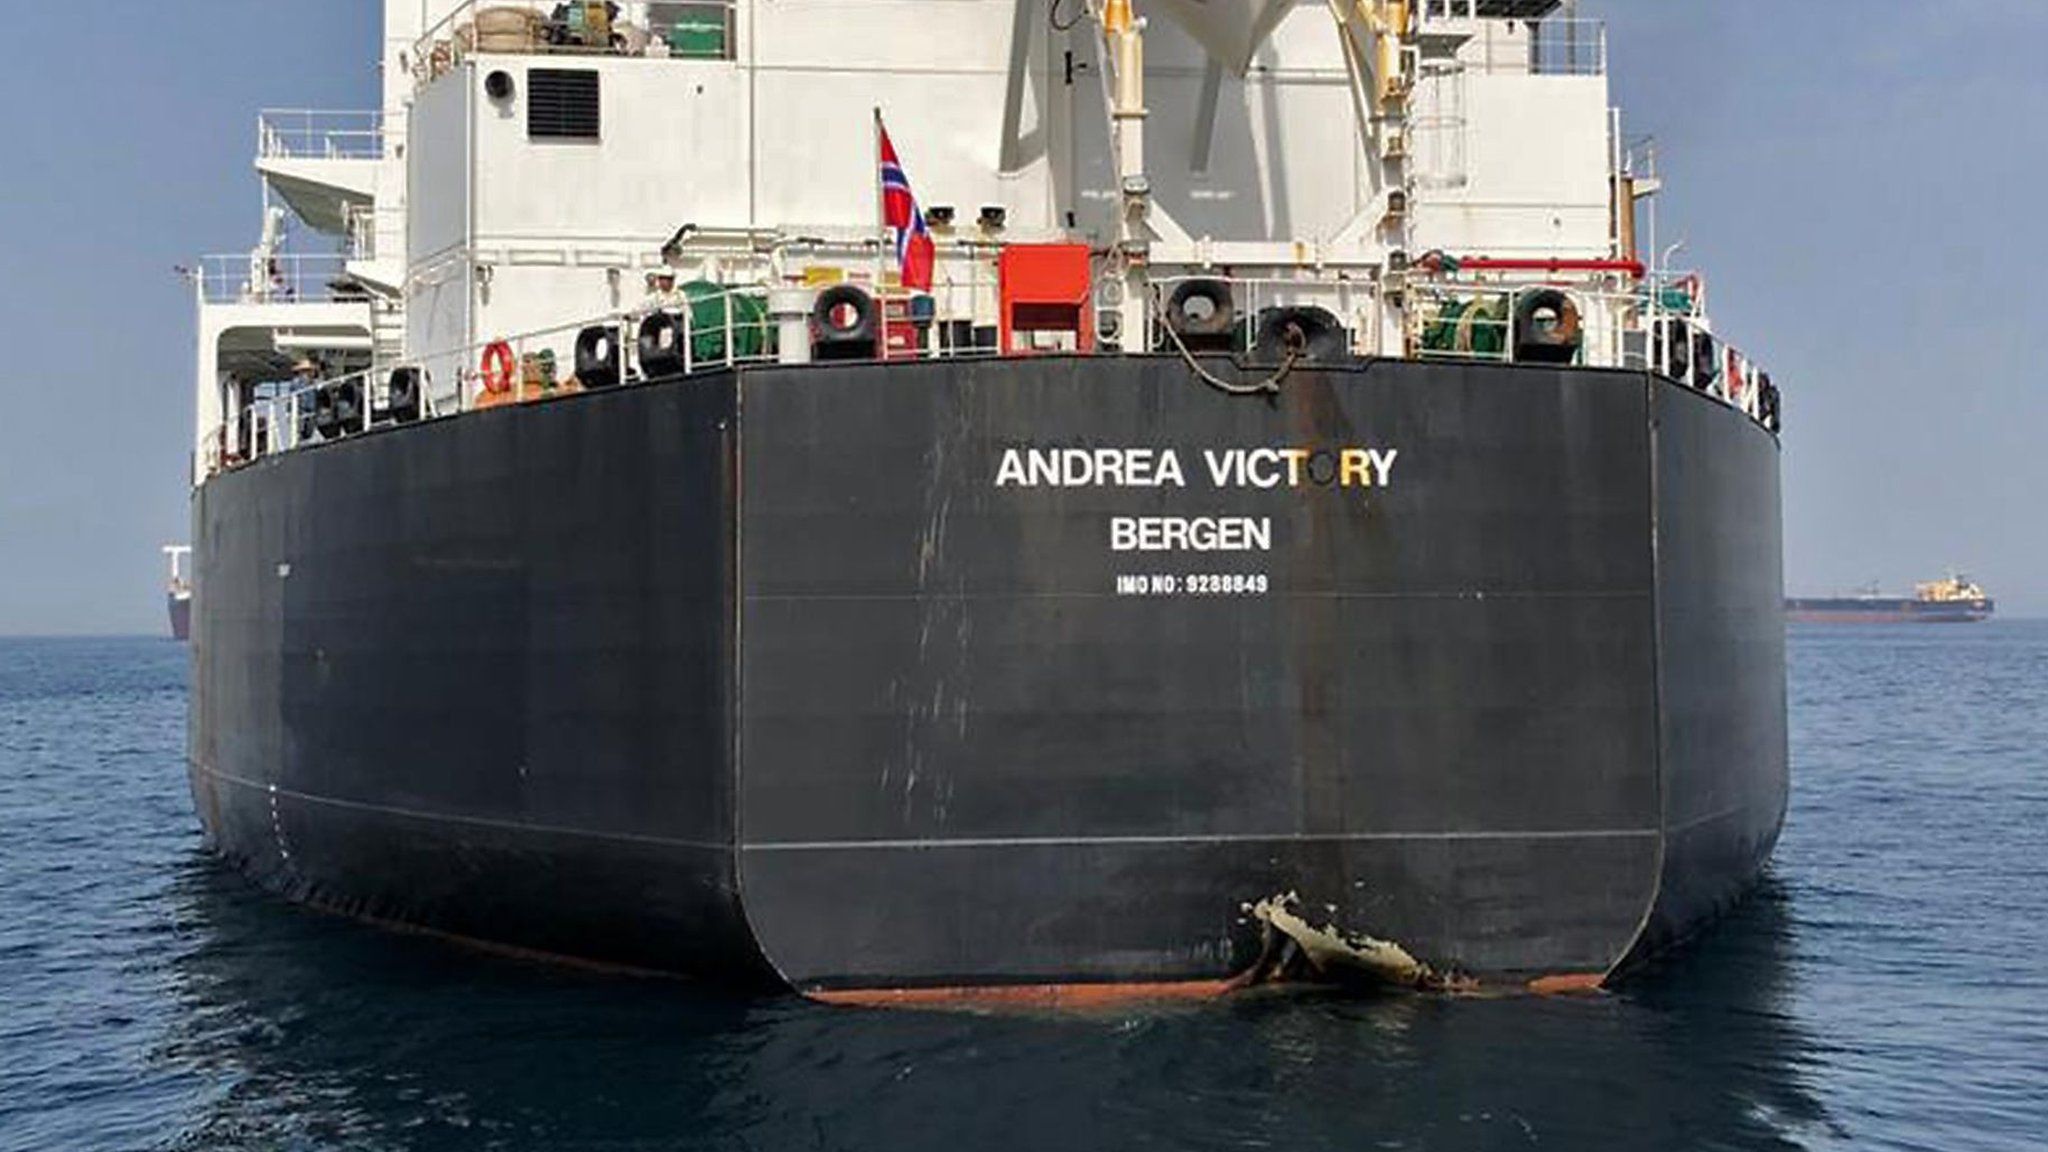 Handout photo showing damage to hull of Norwegian oil tanker Andrea Victory off coast of the UAE (13 May 2019)